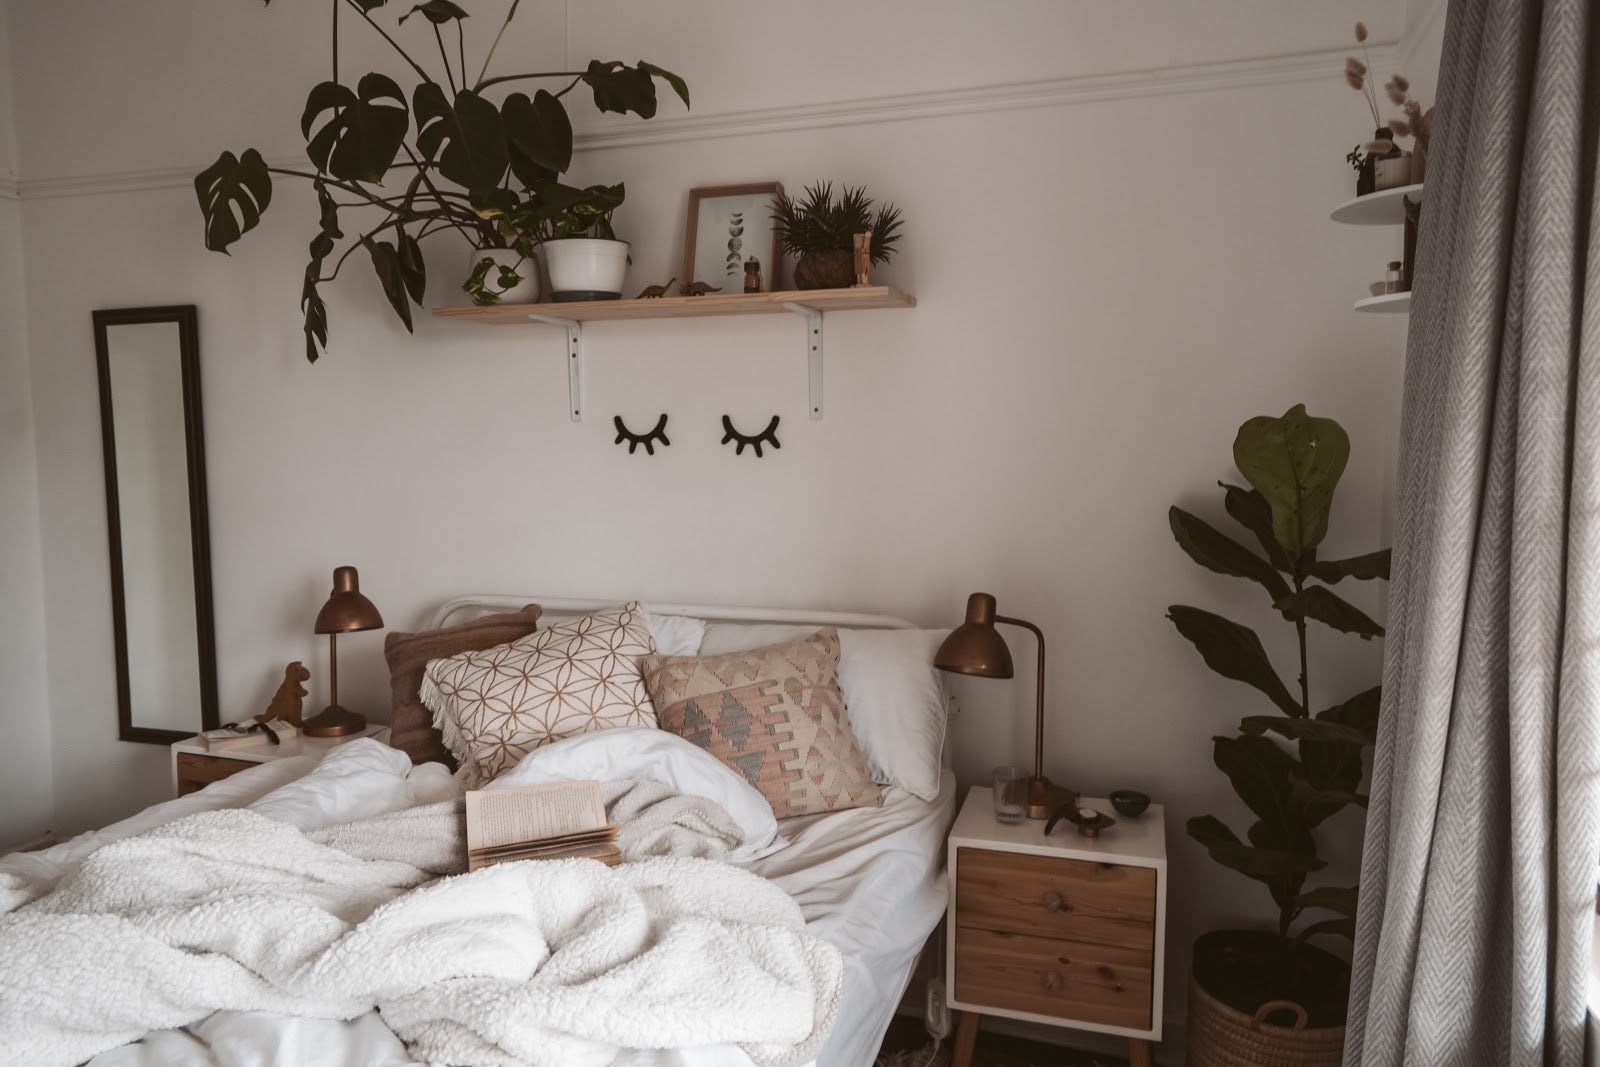 https://medialibrarycfo.entrata.com/5422/MLv3/1/1/2023/04/10/050150/White-Bedroom-with-Throw-Pillows-and-Plants.jpg